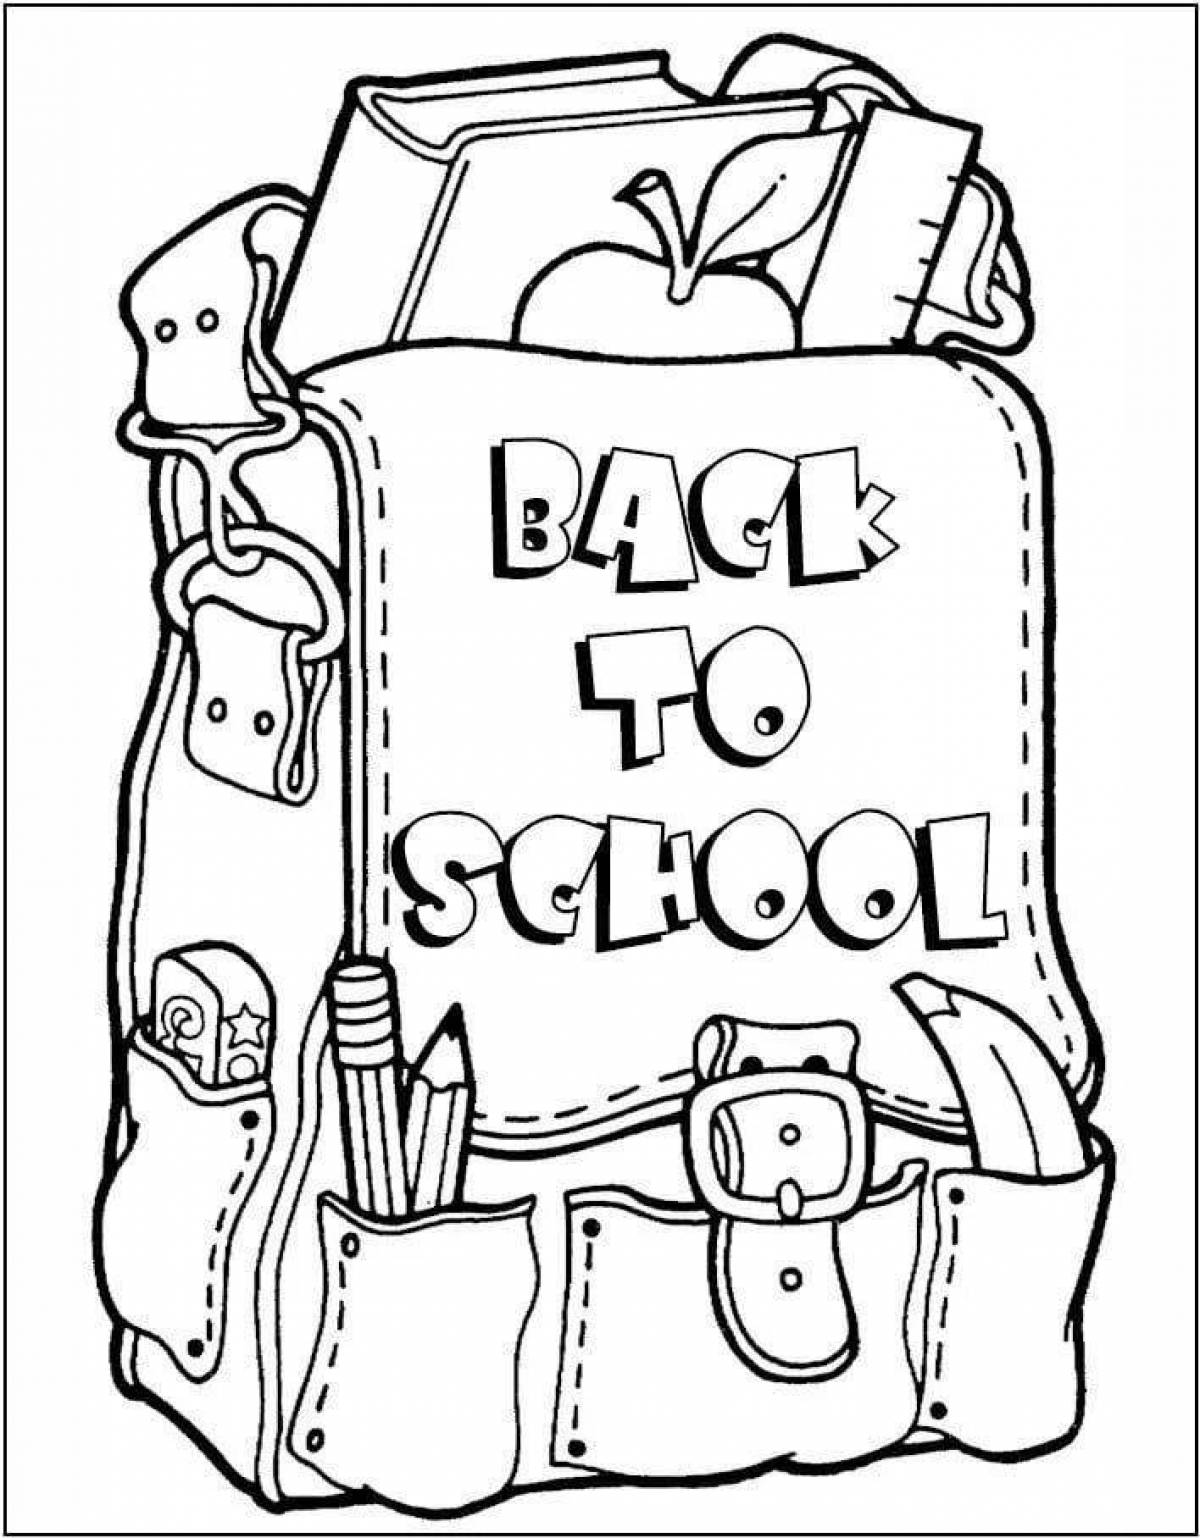 Exciting school bus coloring book